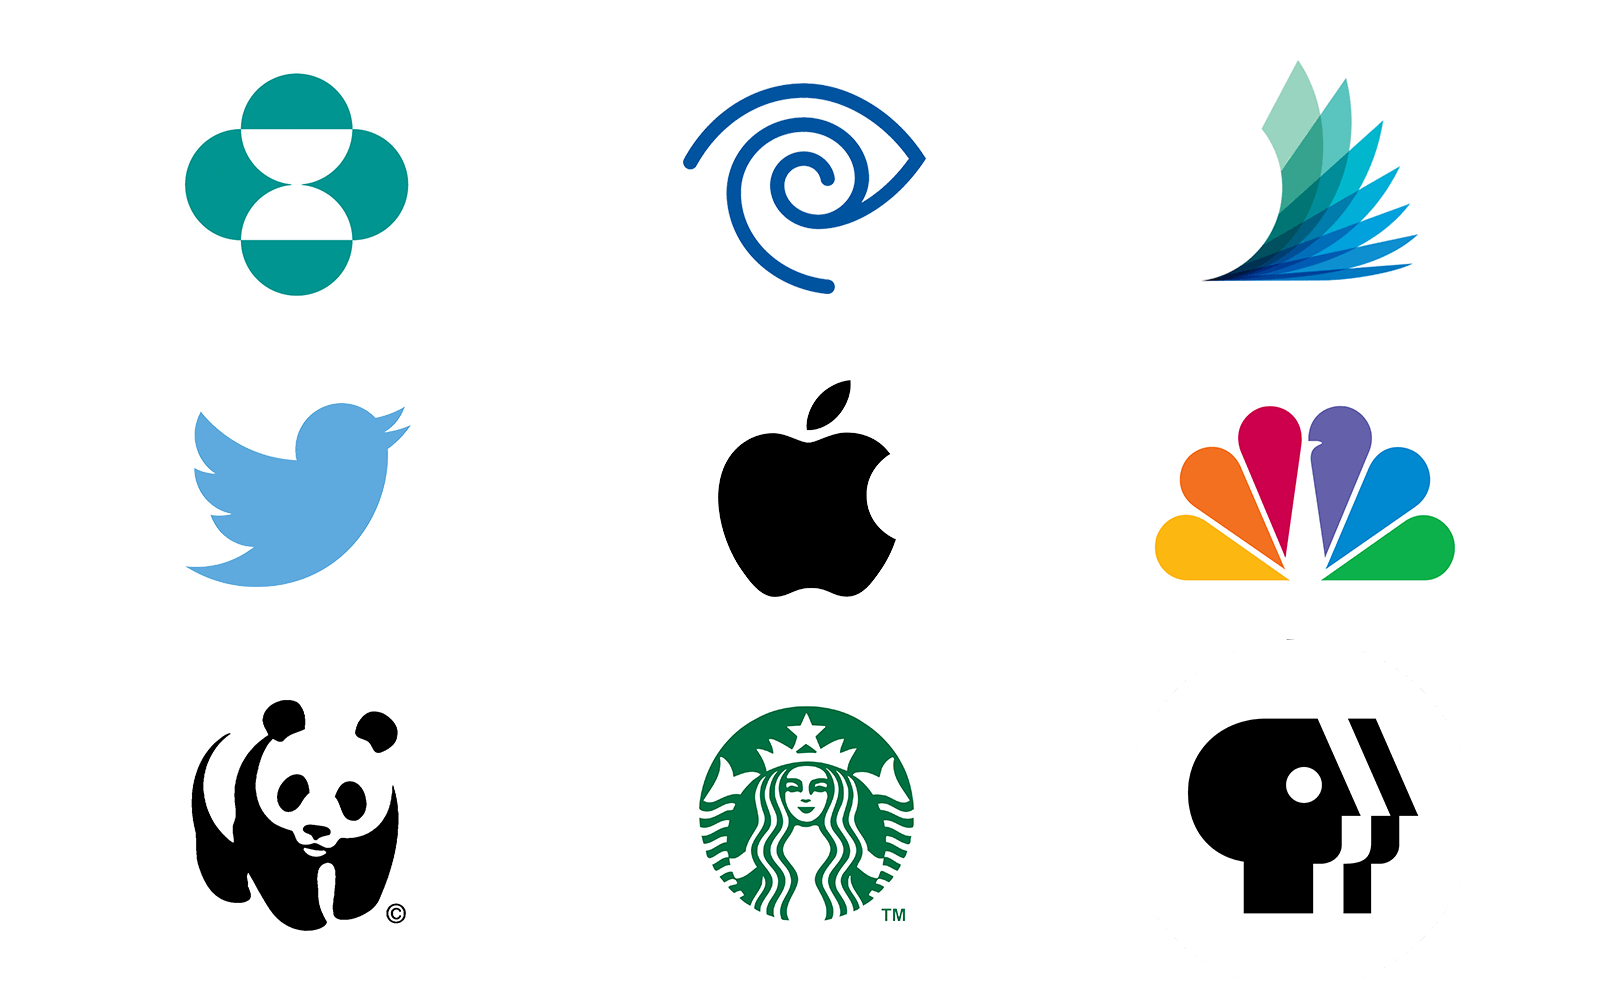 Pictoral Logo - Types of Logos to Consider For Your Brand